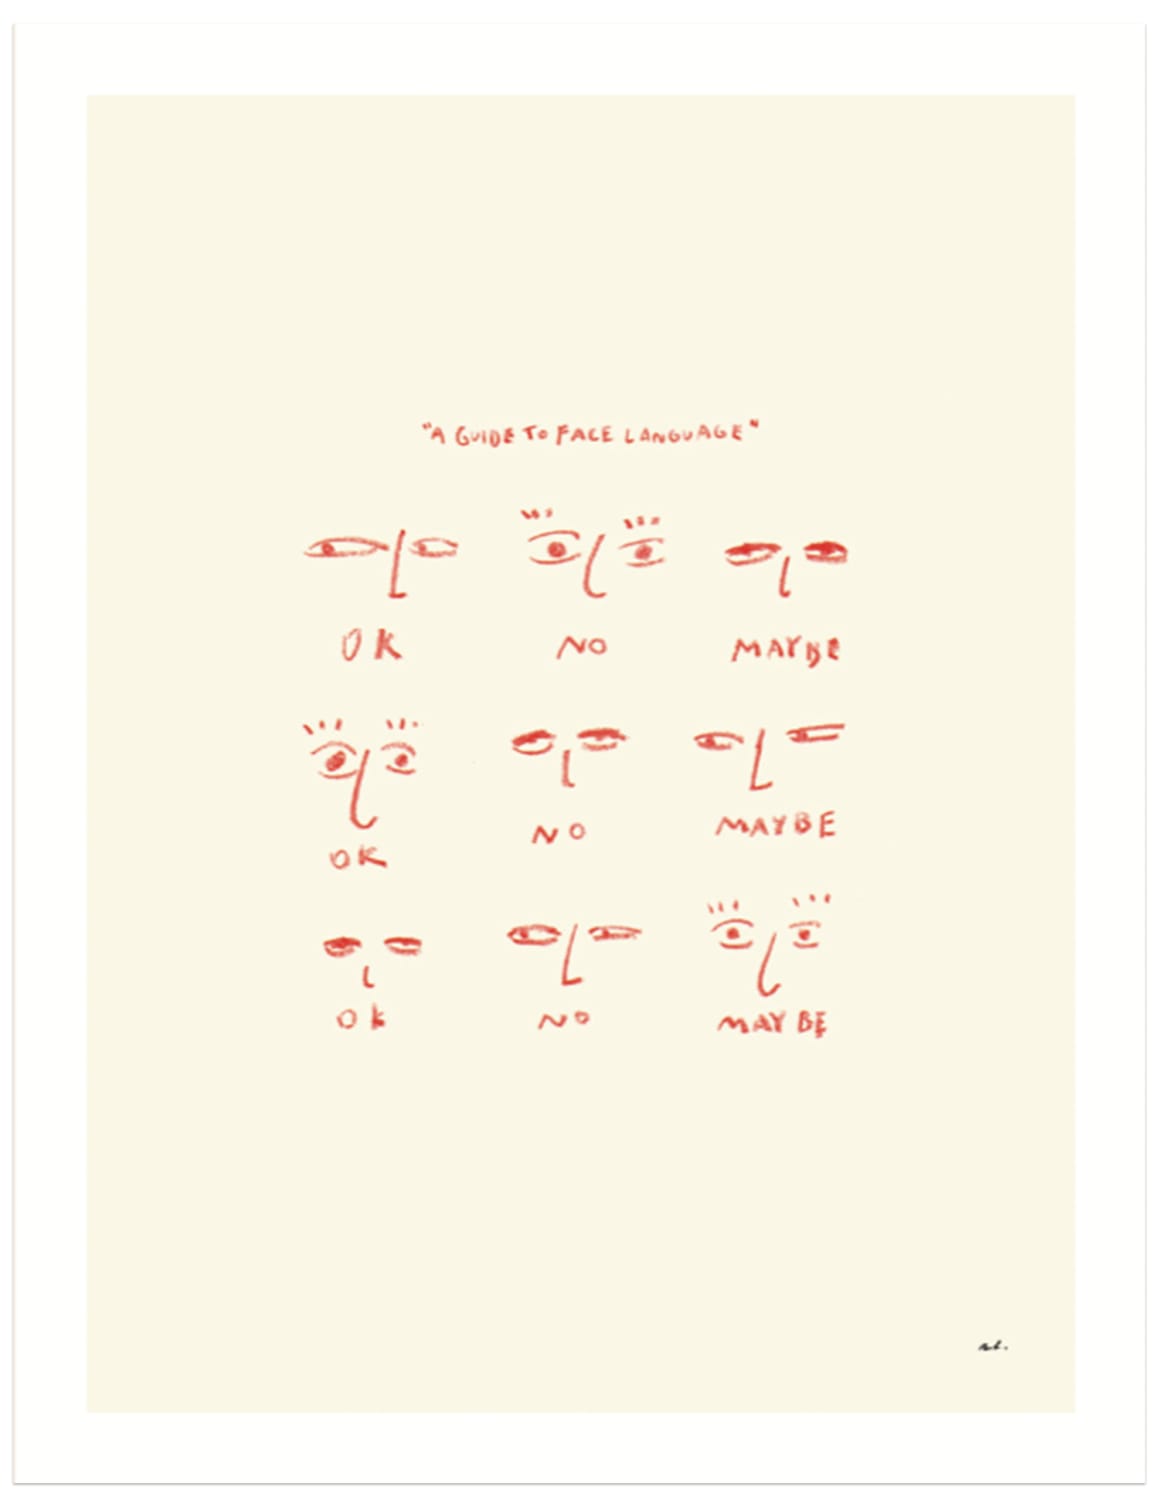 A Guide to Face Language Print